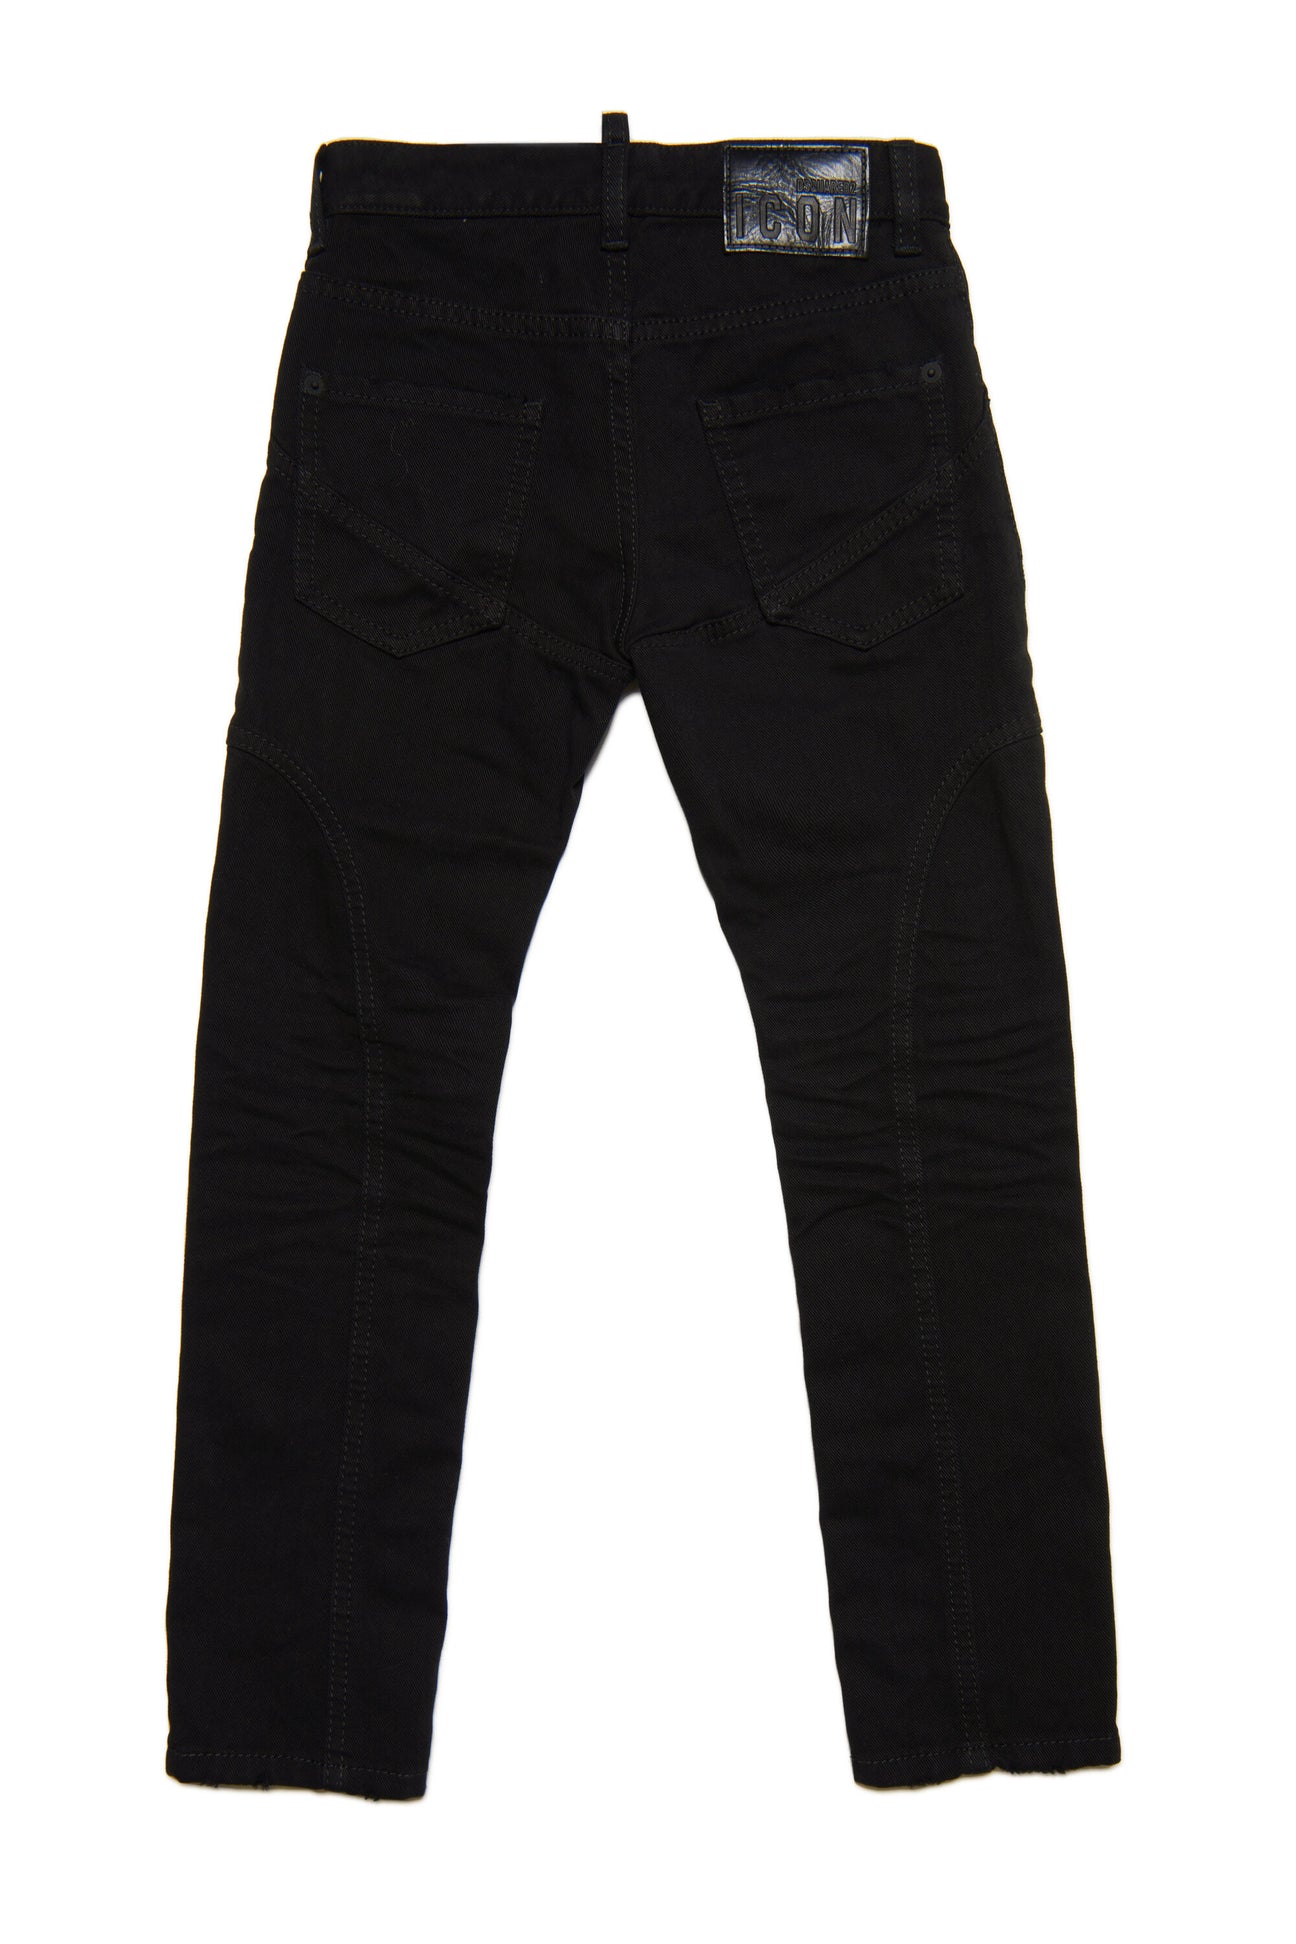 Cool Guy skinny black jeans with abrasions and Icon logo Cool Guy skinny black jeans with abrasions and Icon logo